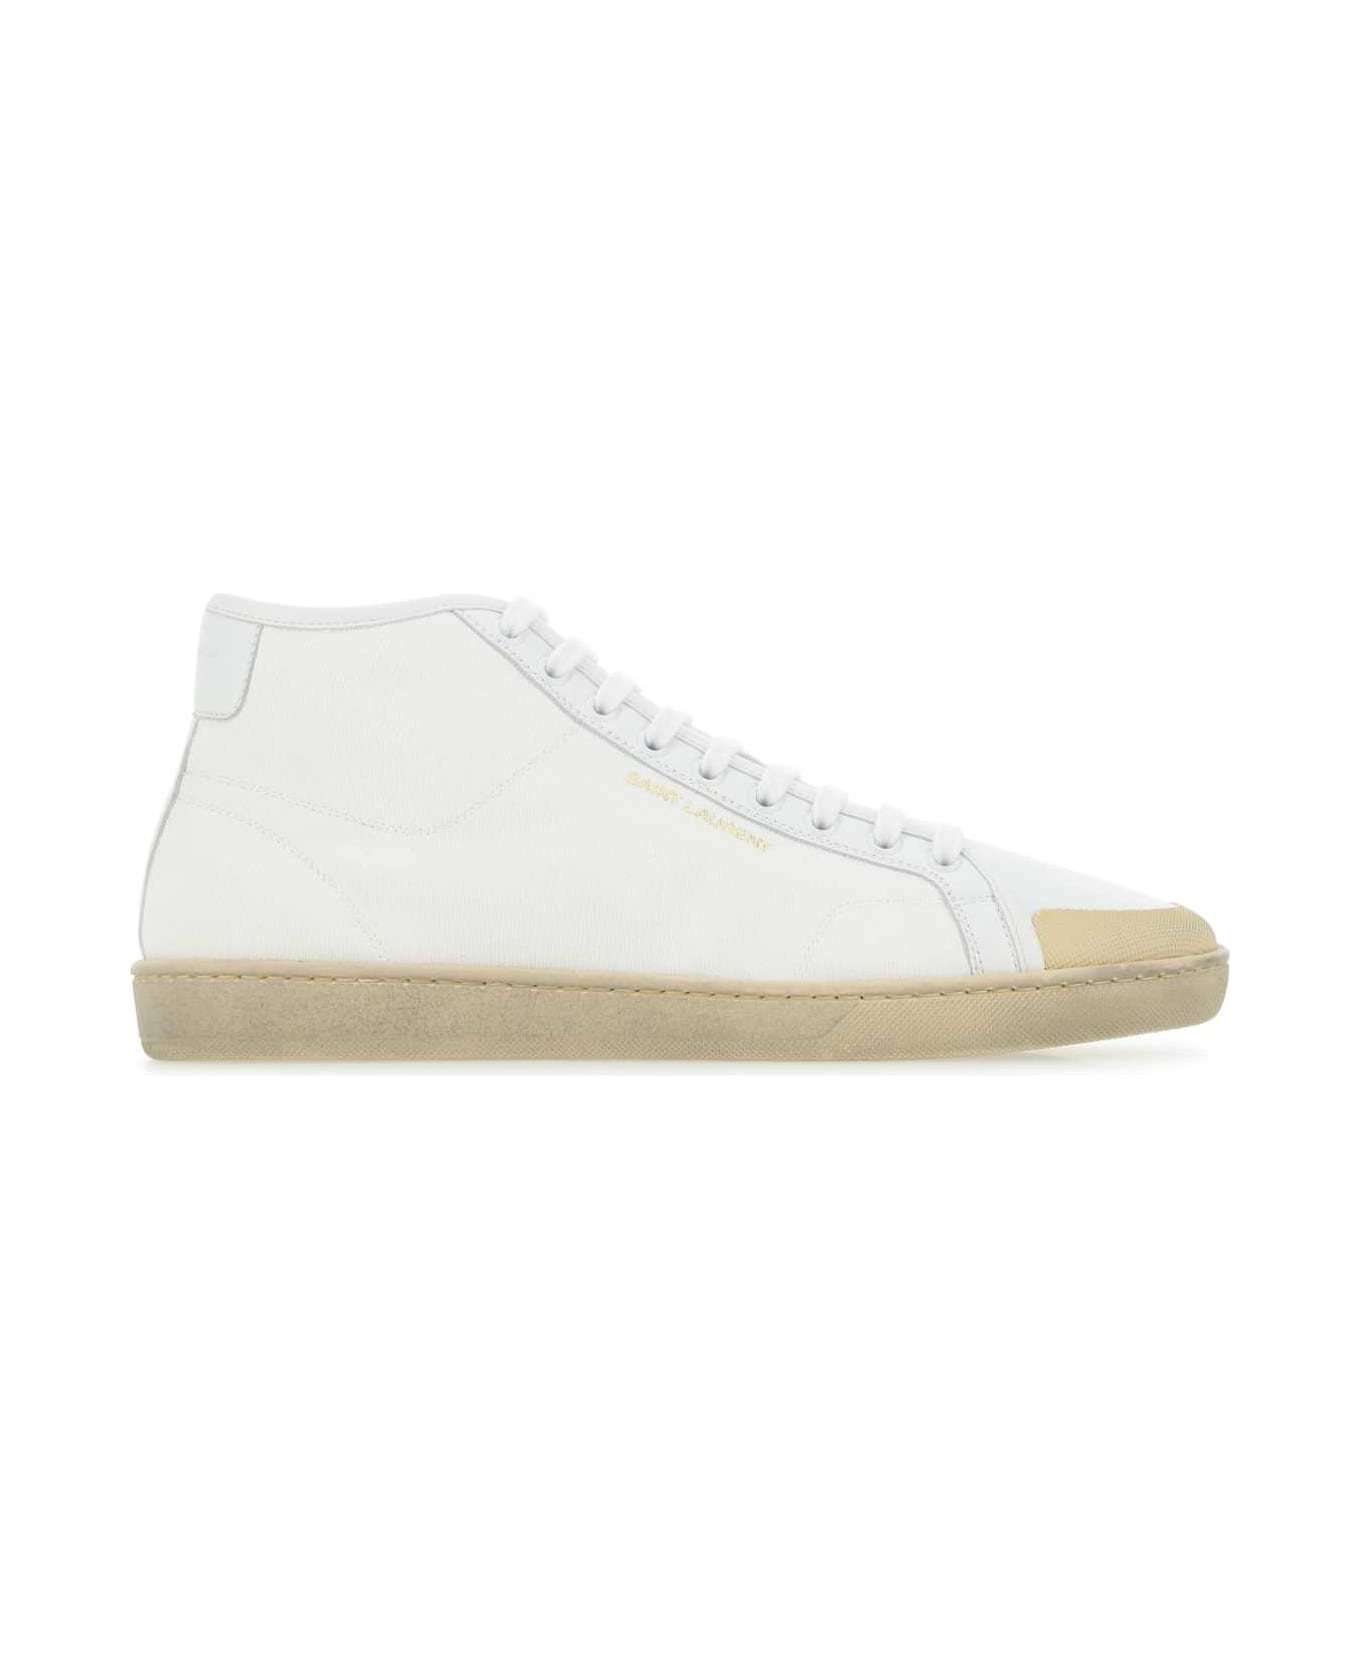 Saint Laurent White Canvas And Leather Court Classic Sl/39 Sneakers - 9026